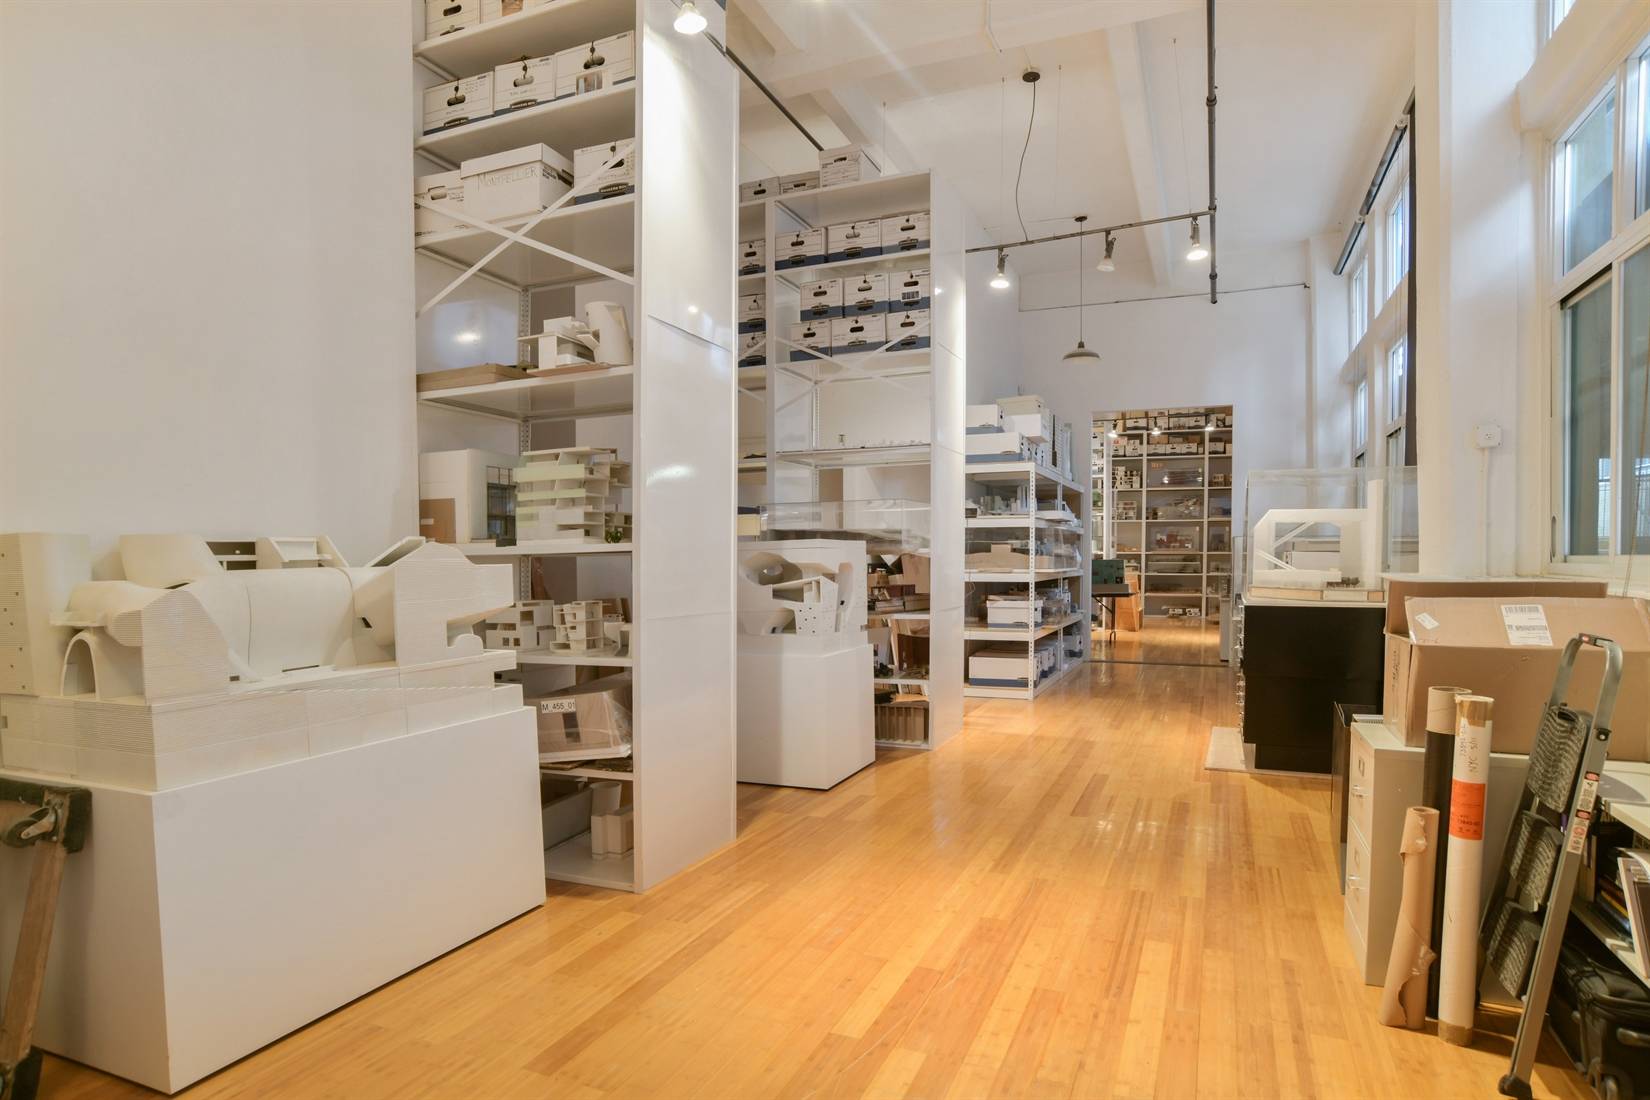 Opportunities abound in this enormous 1, 679 sqft loft a combination of 2 oversized, light filled commercial condo lofts in Greenpoint, Brooklyn.